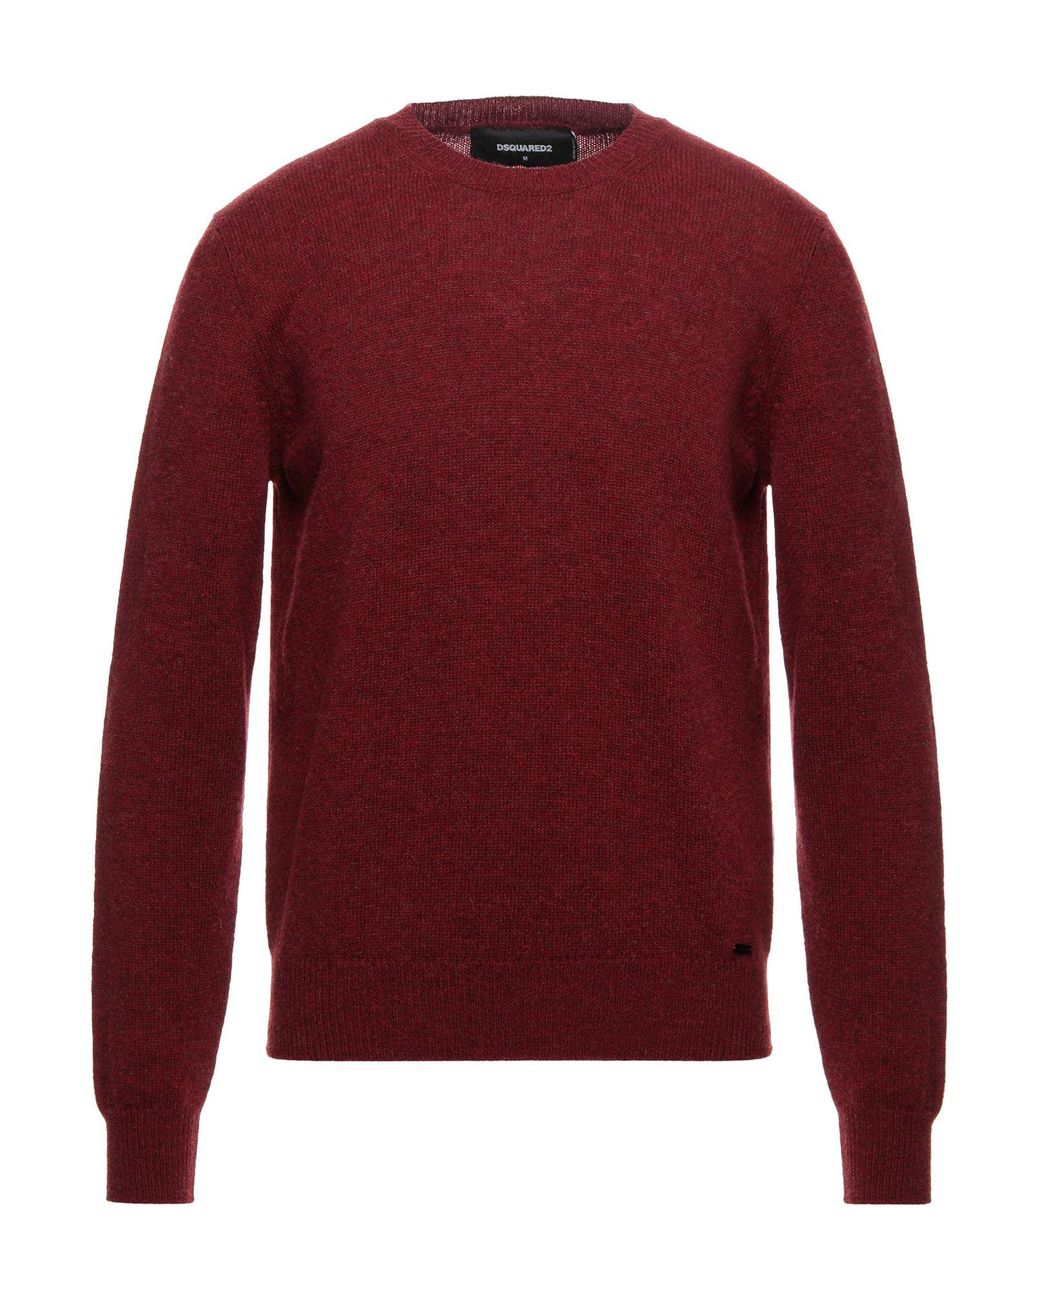 DSquared² Wool Jumper in Maroon (Red) for Men - Lyst